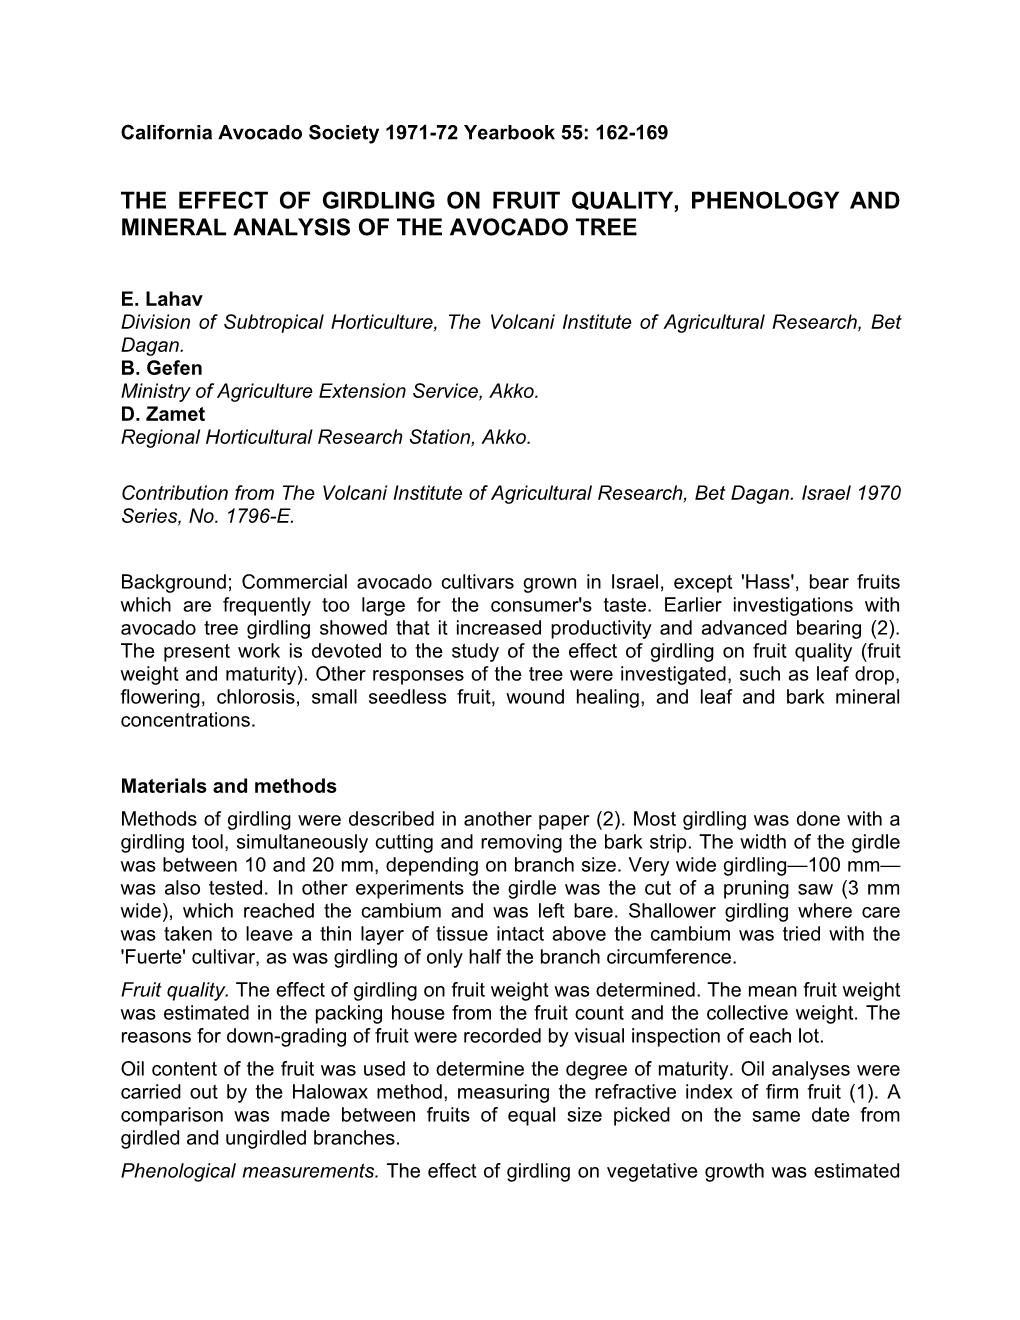 The Effect of Girdling on Fruit Quality, Phenology and Mineral Analysis of the Avocado Tree